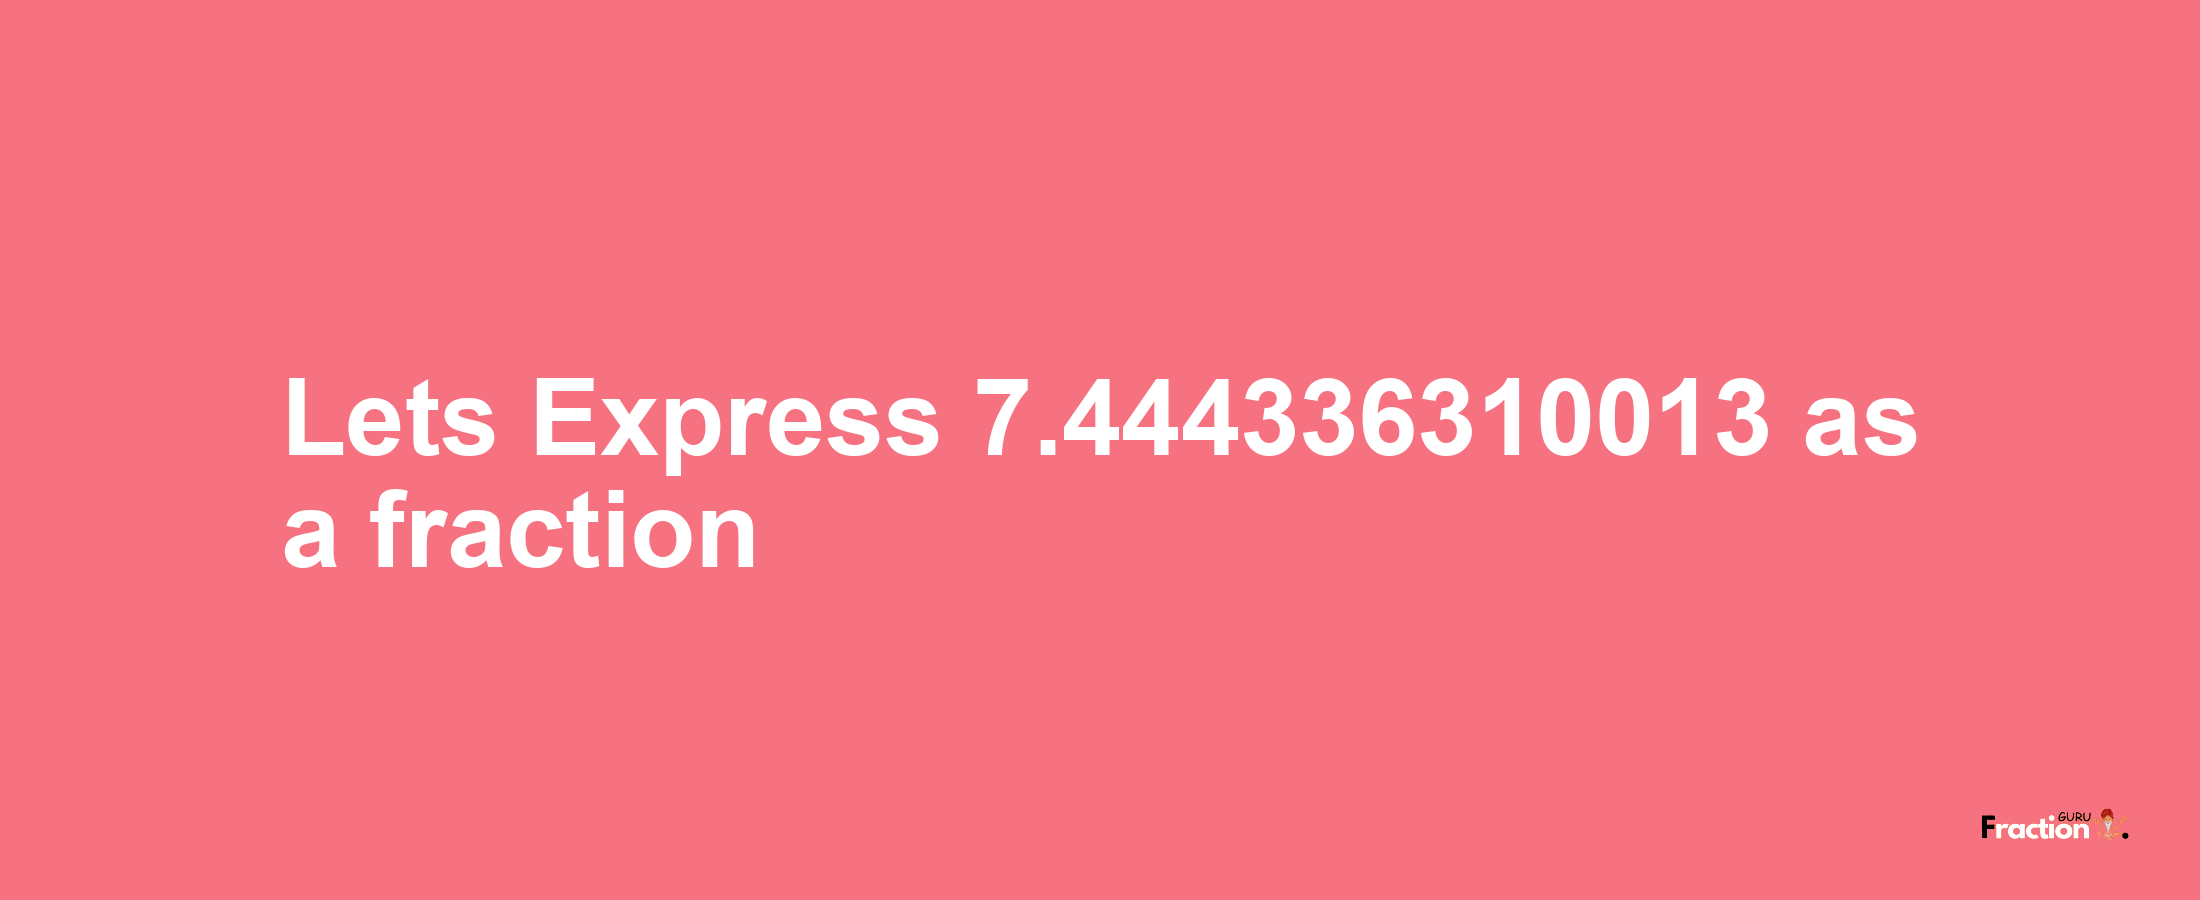 Lets Express 7.444336310013 as afraction